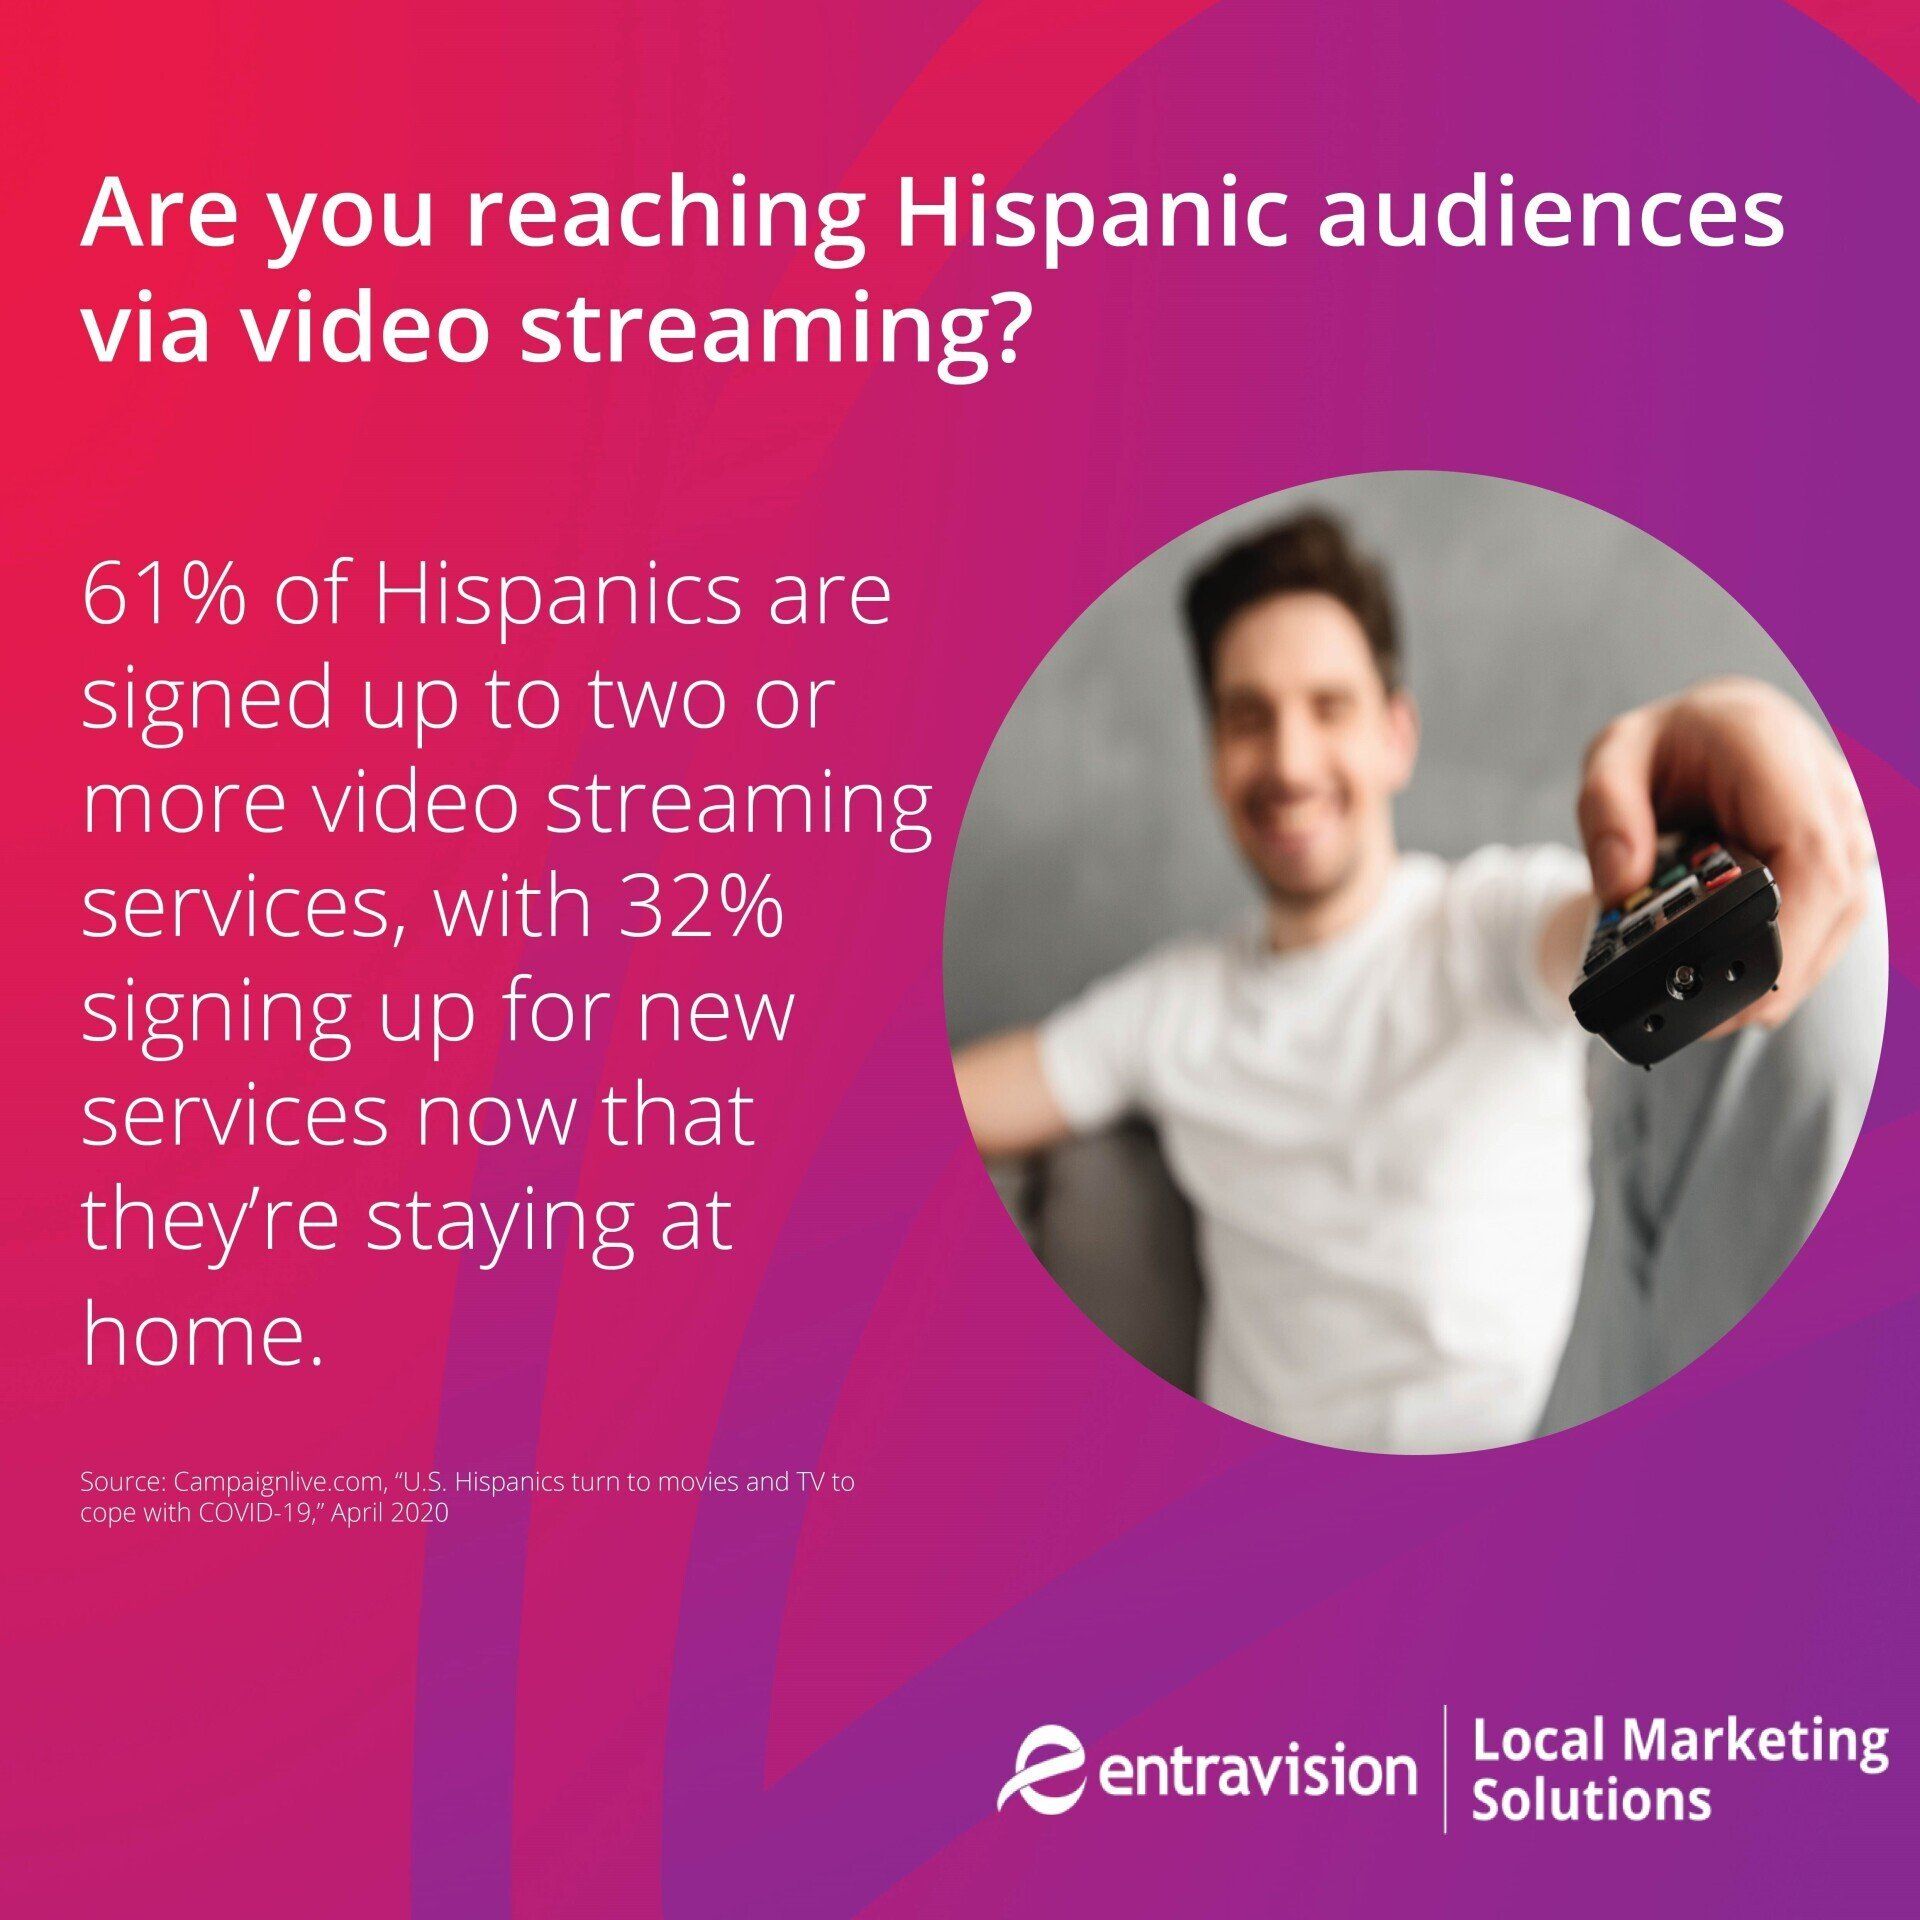 A picture of a man holding a remote is beside a quote showing that U.S. Hispanic audiences over-index when it comes to digital video streaming via CTV/OTT devices. This makes CTVOTT marketing a perfect way to reach them!